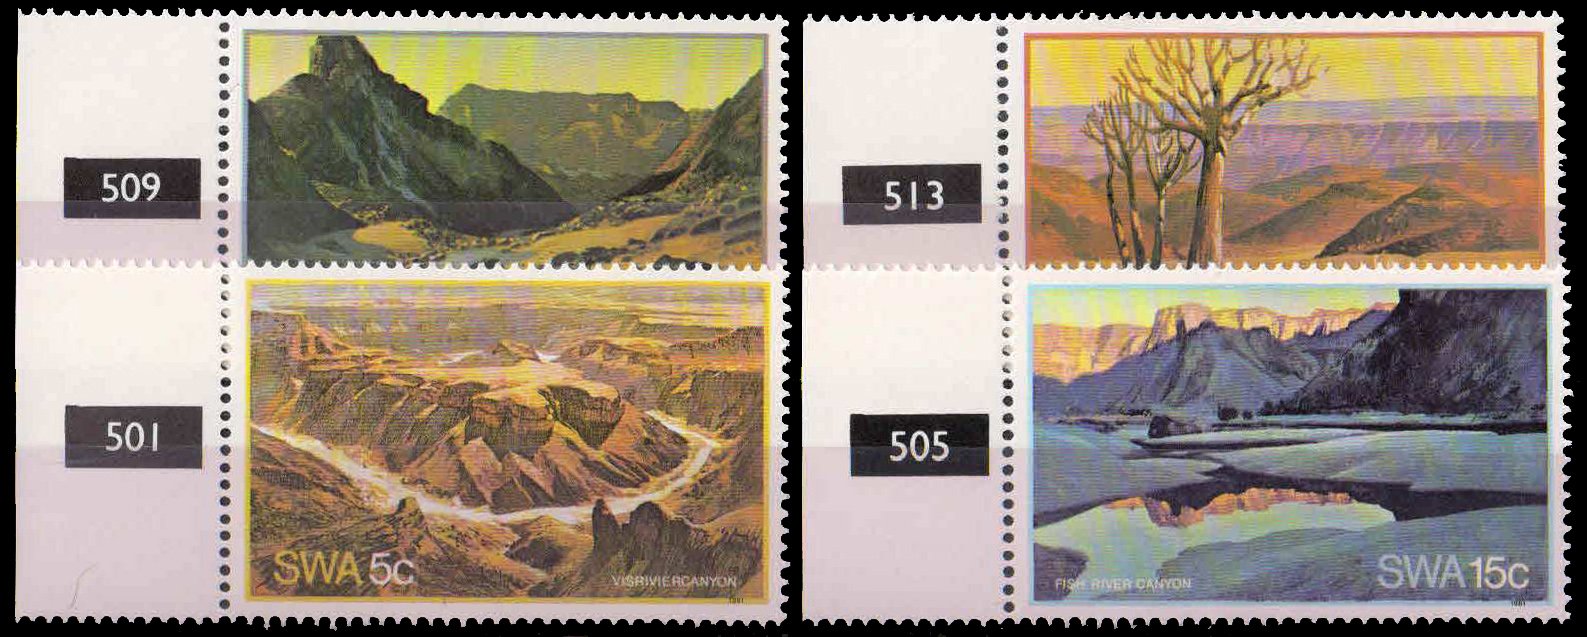 SOUTH WEST AFRICA 1981-Fish River Canyon-Various Views of Canyon, Set of 4, MNH, S.G. 373-376